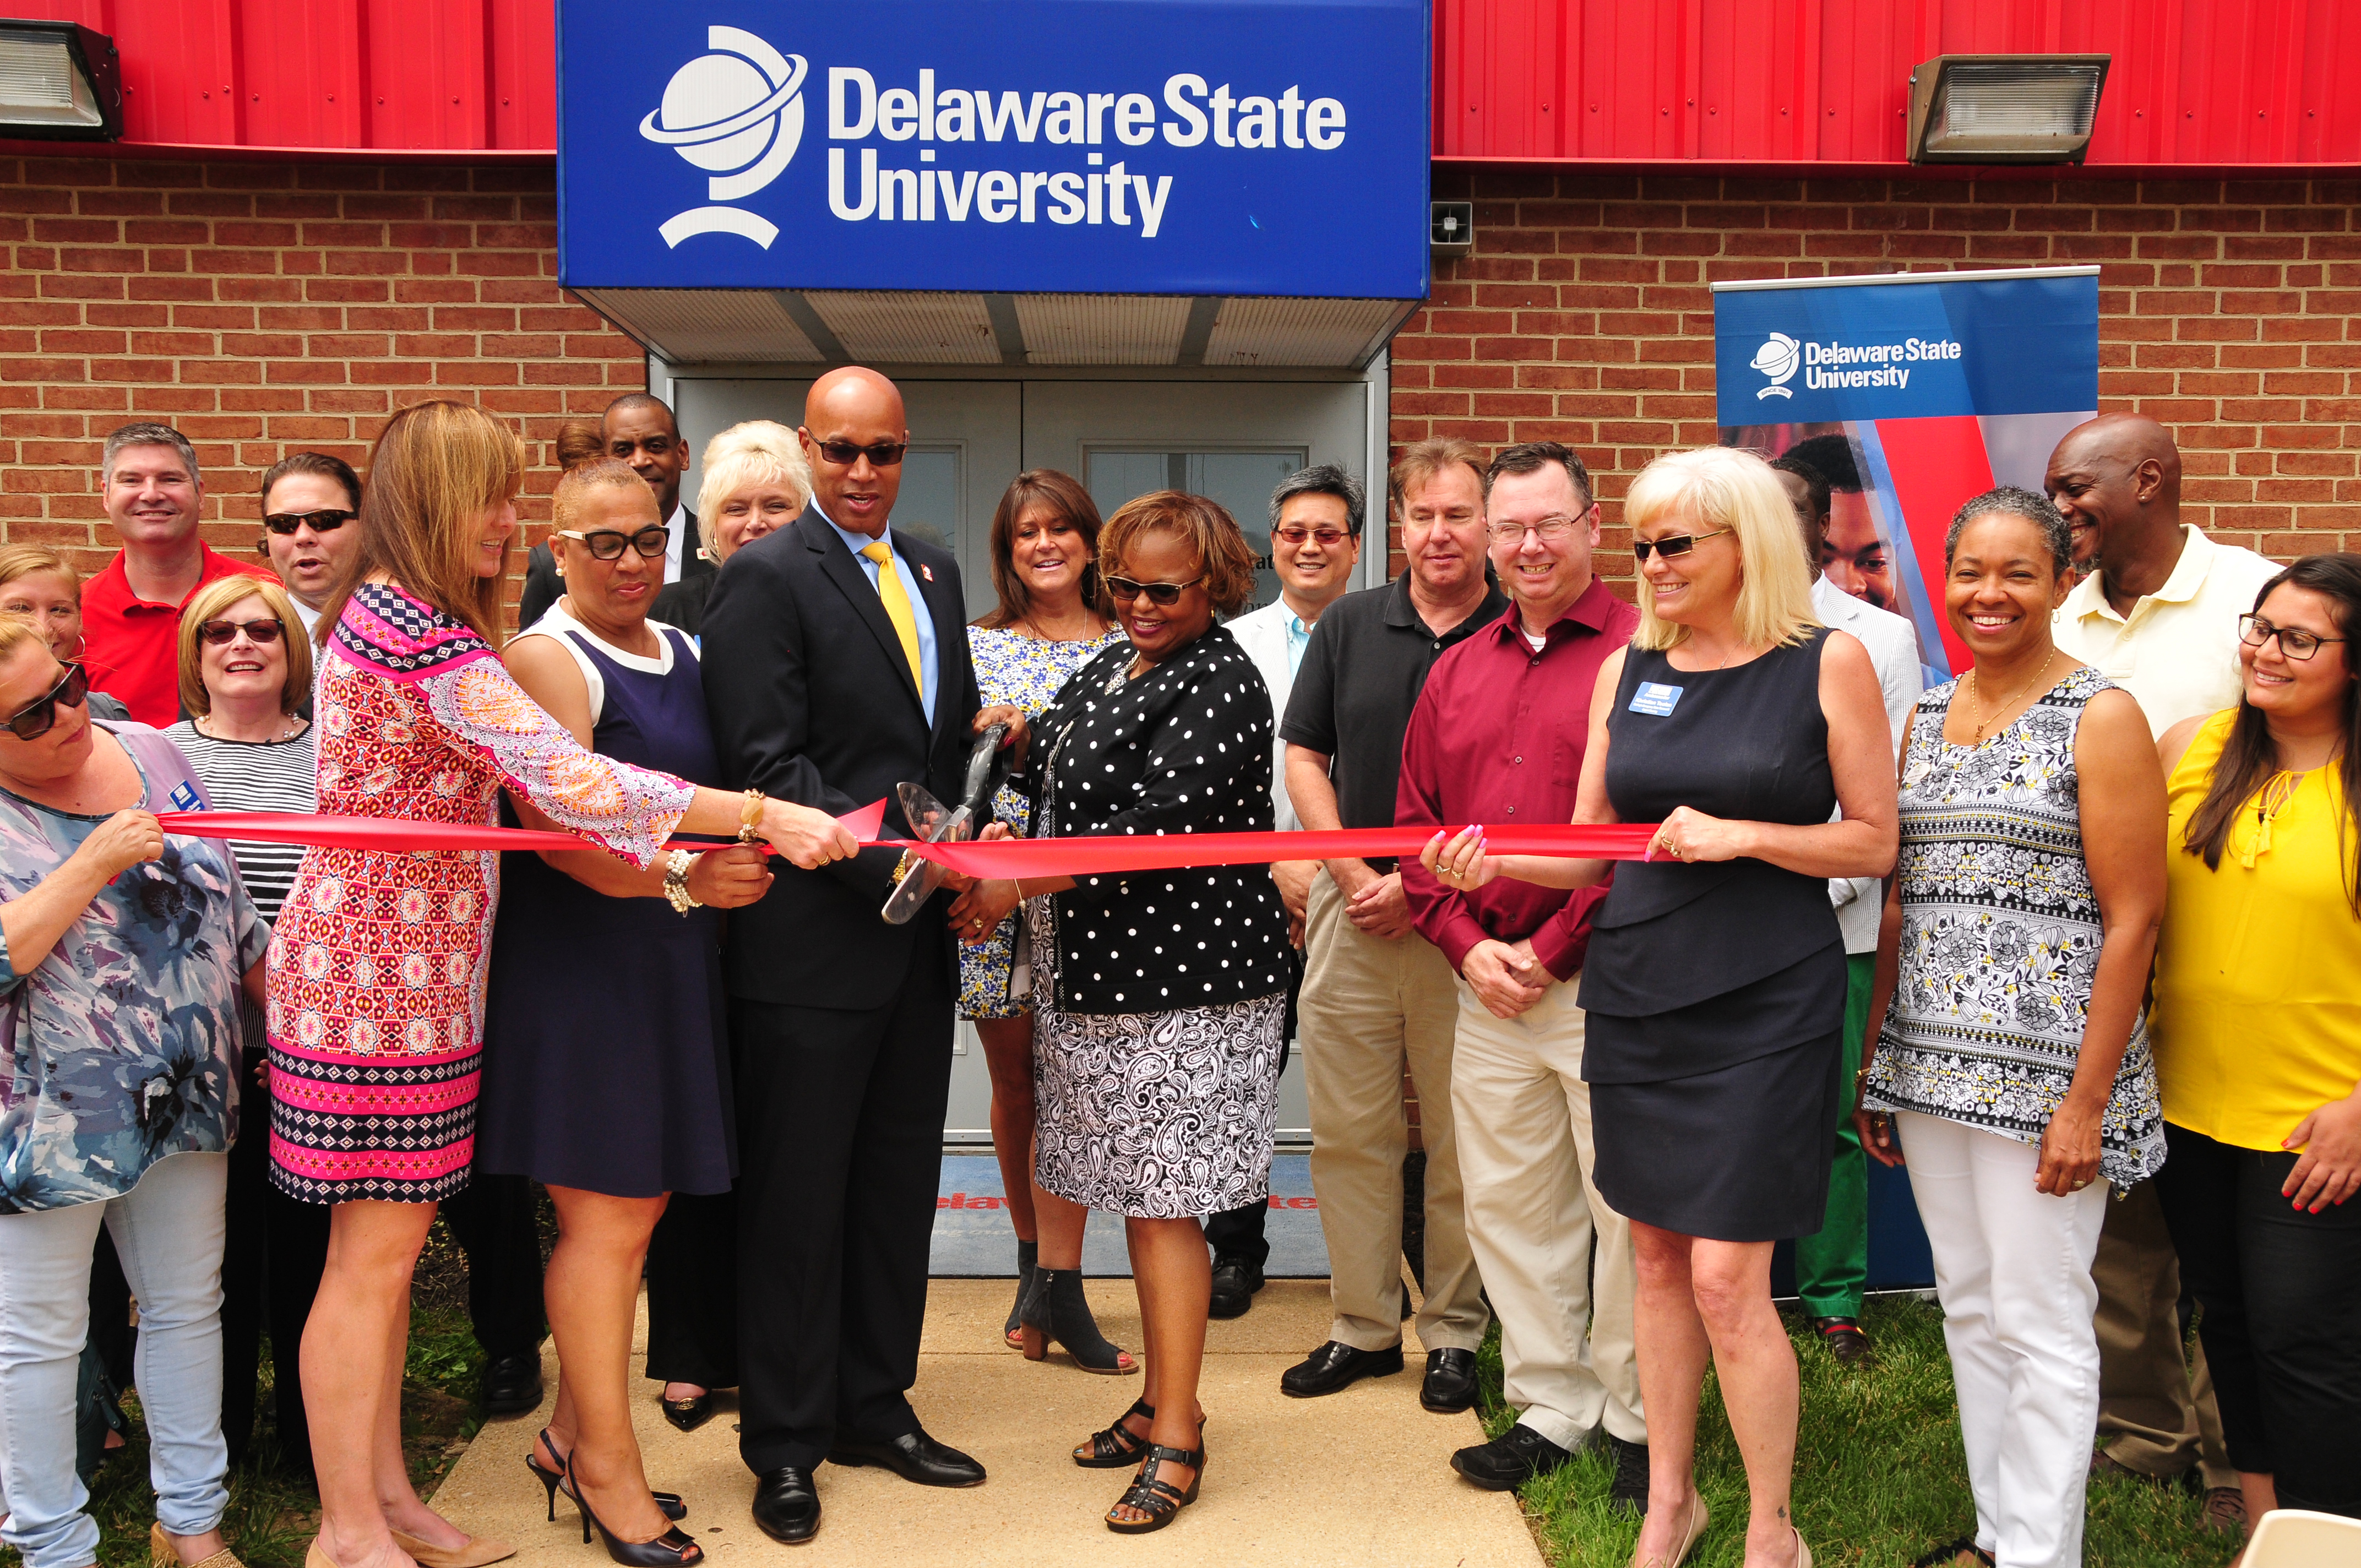 DSU Board of Trustees member Roy Roper and DSU Chief Financial Officer Teresa Hardee join officials of the New Castle County Chamber of Commerce for a ribbon cutting ceremony at the DSU@Wilmington location in recognition of its educational contribution to Northern Delaware.